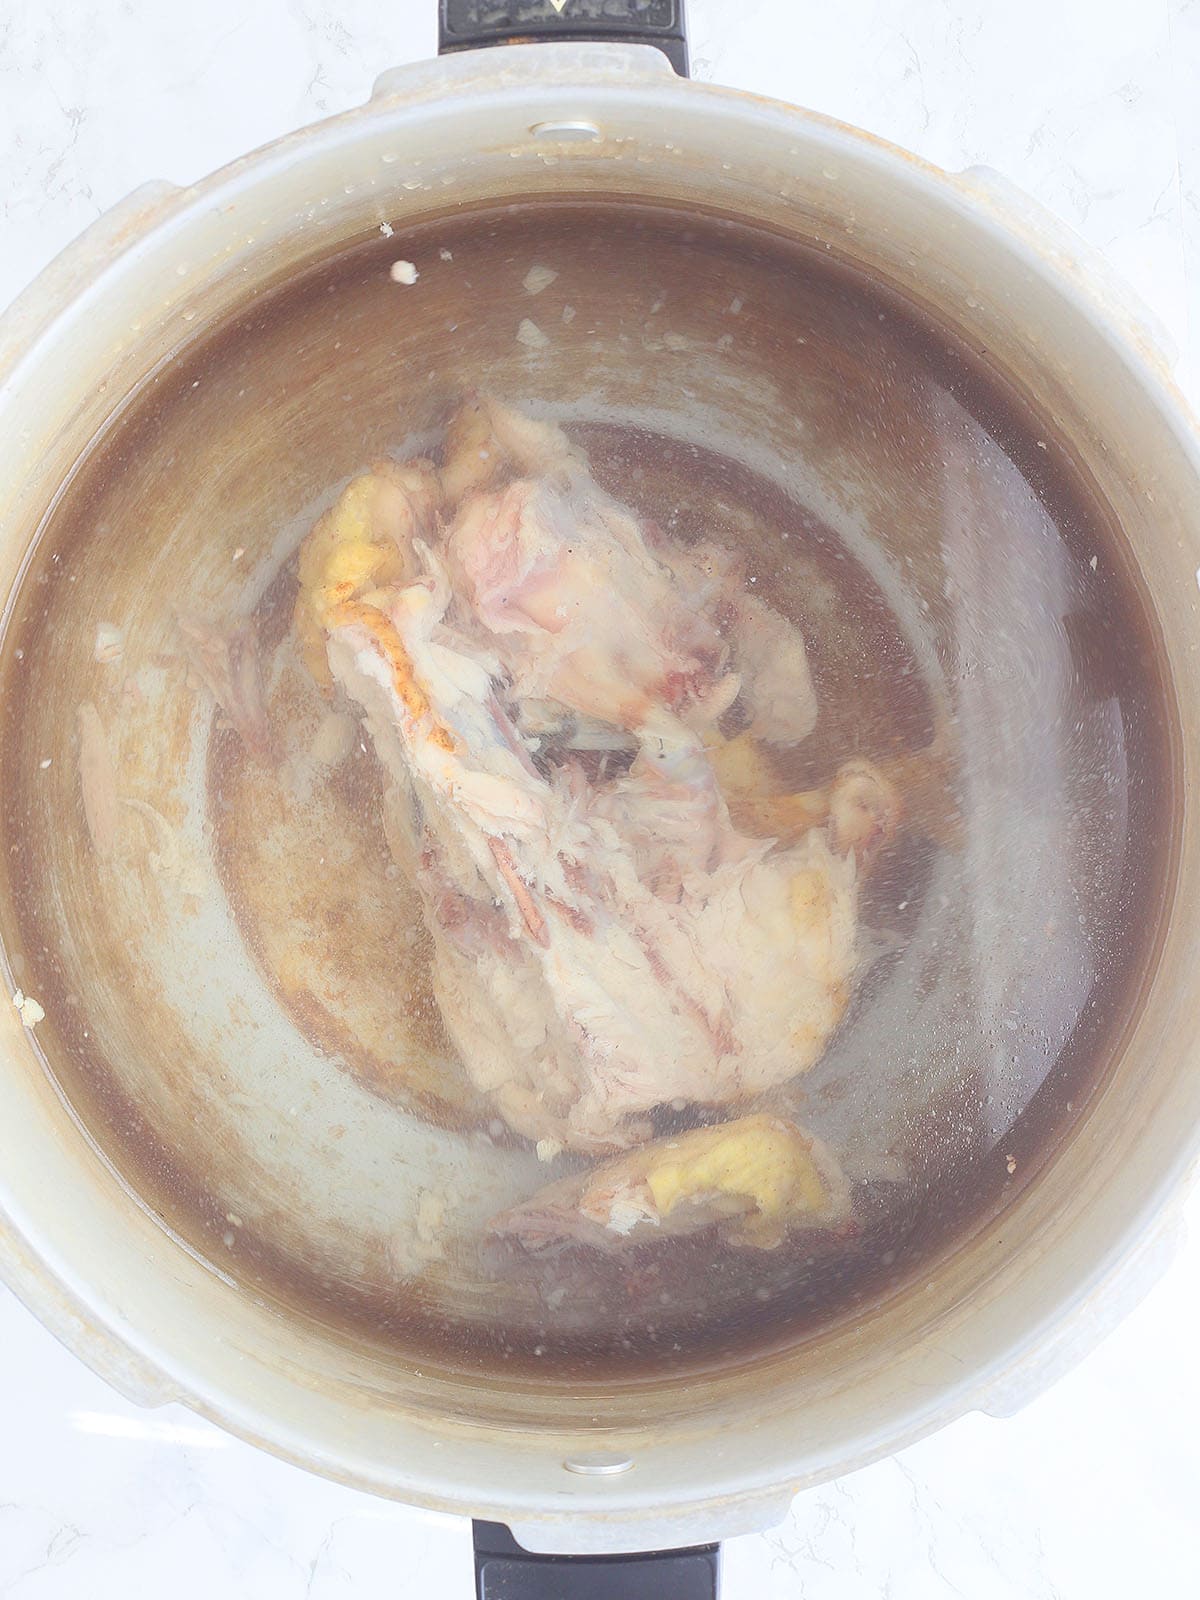 Chicken carcass after water has been poured over the top.